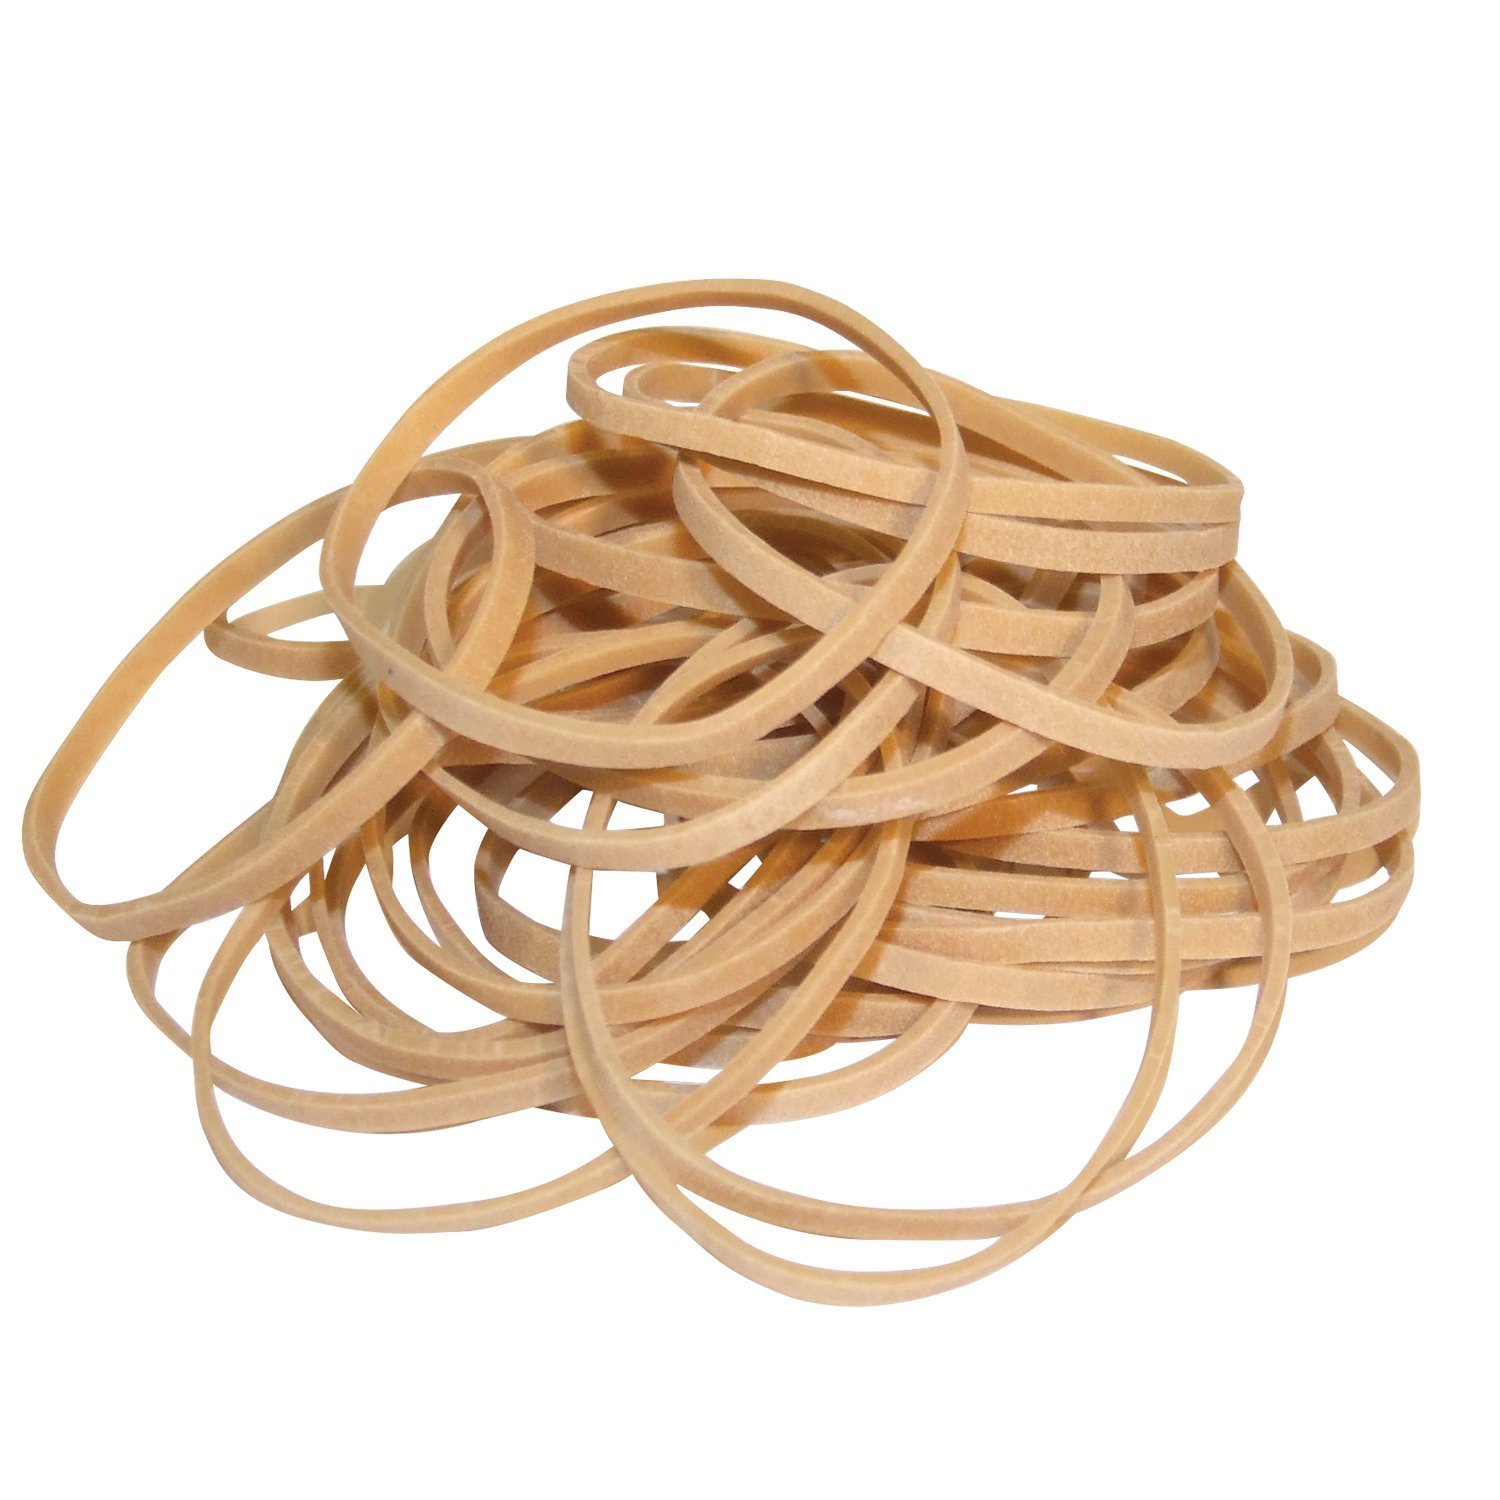 ValueX Rubber Band No 64 6x90mm 454g Natural